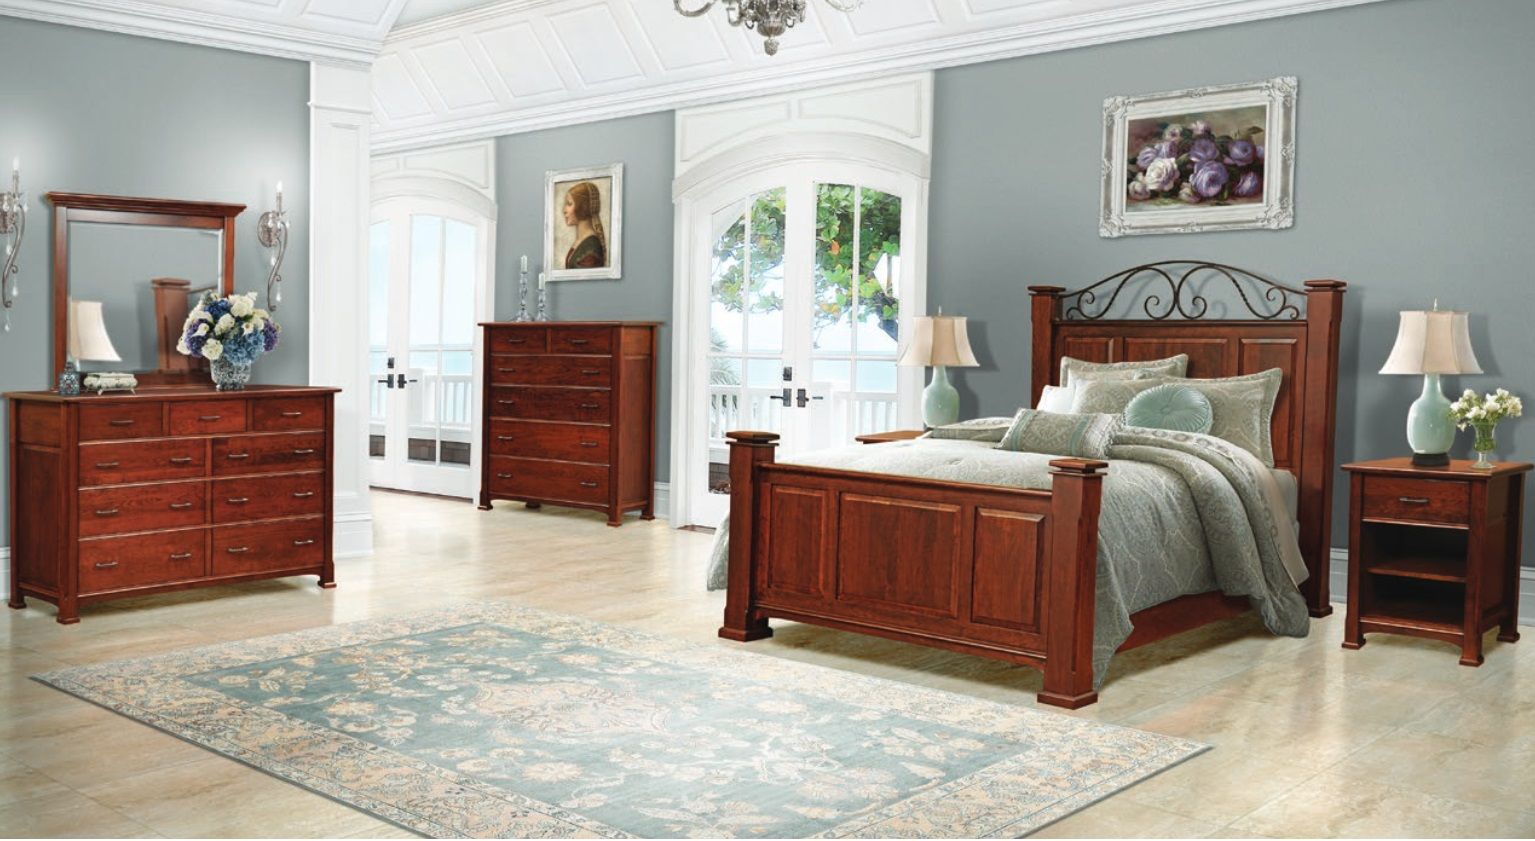 walnut and wrought iron bedroom furniture